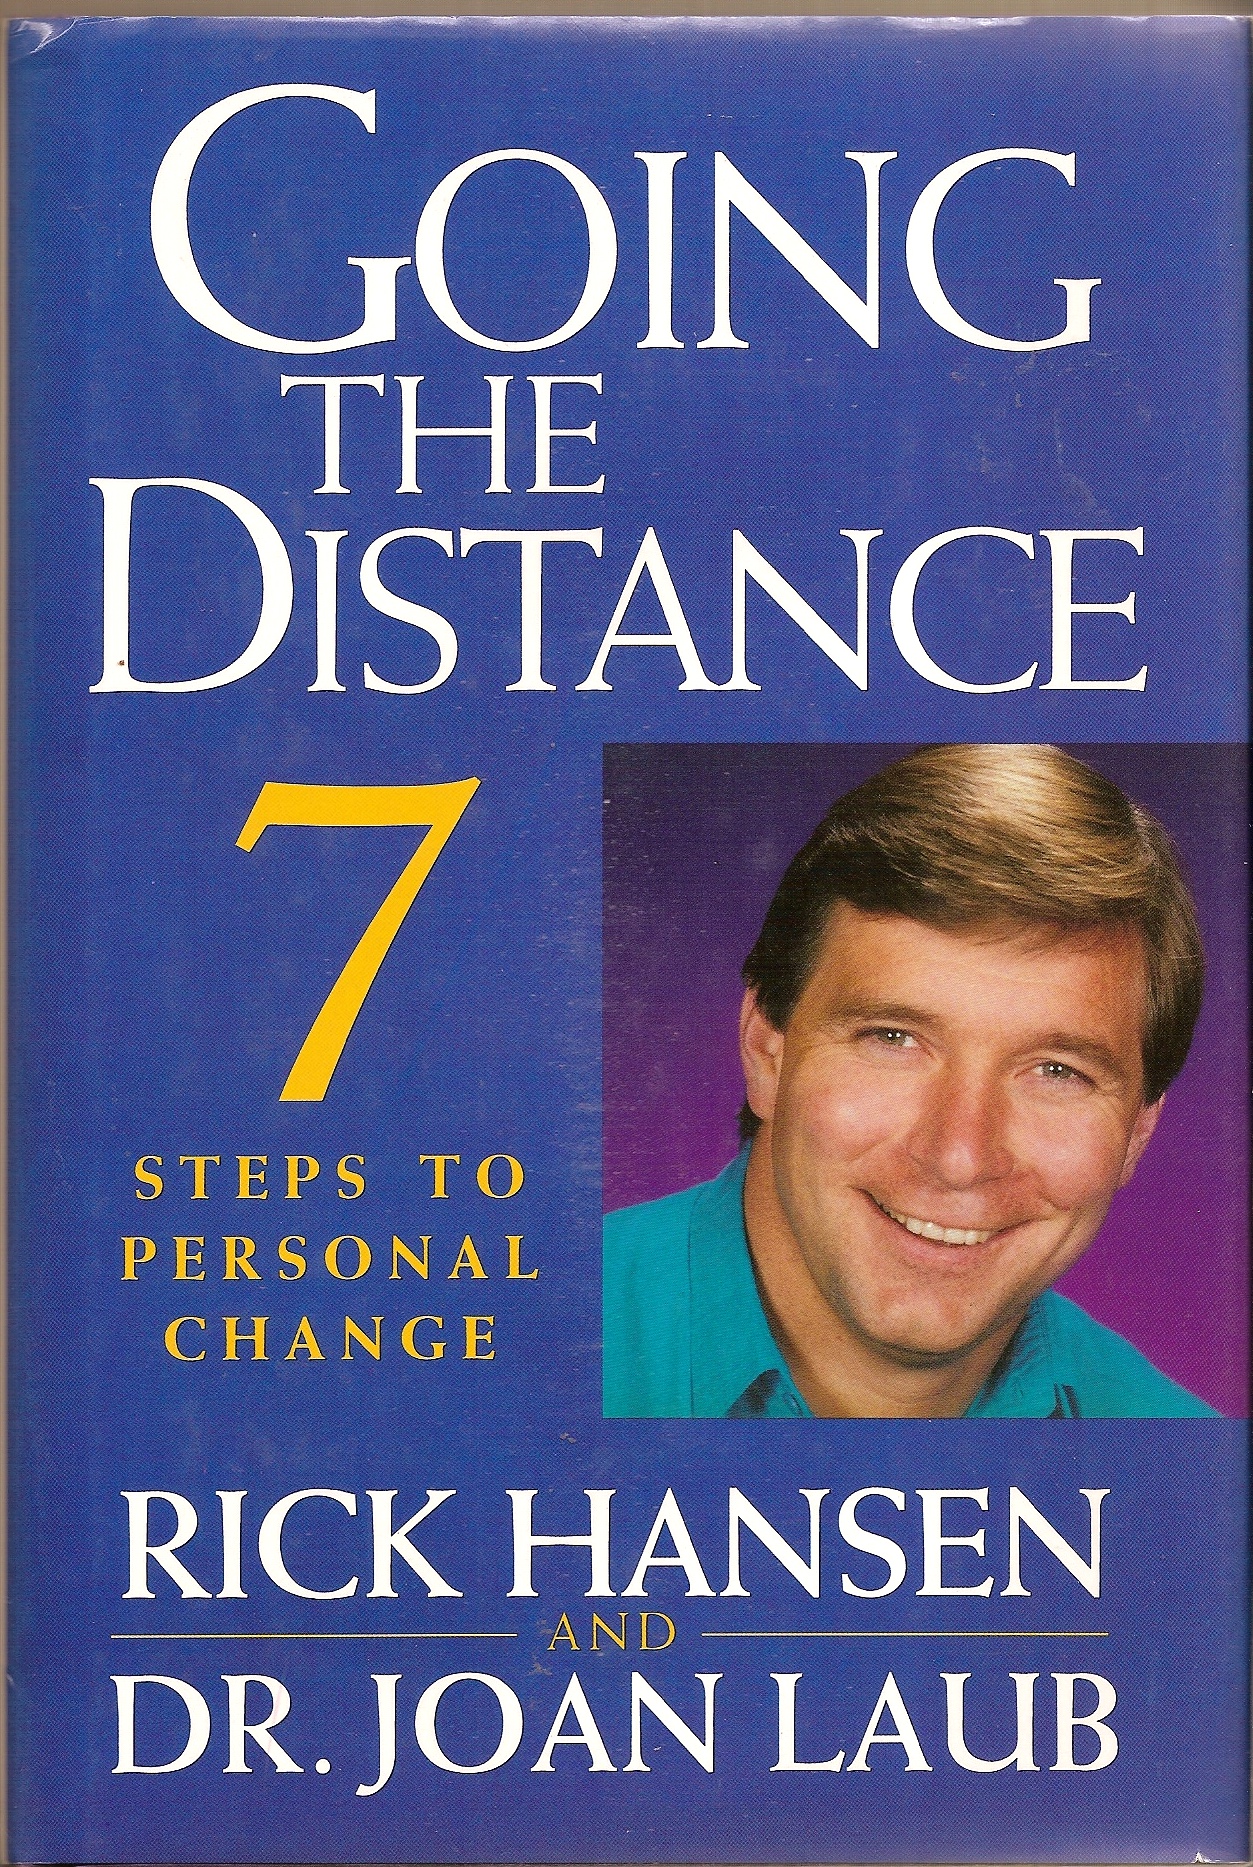 HANSEN RICK & DR. JOAN LAUB - Going the Distance **Signed** 7 Steps to Personal Change